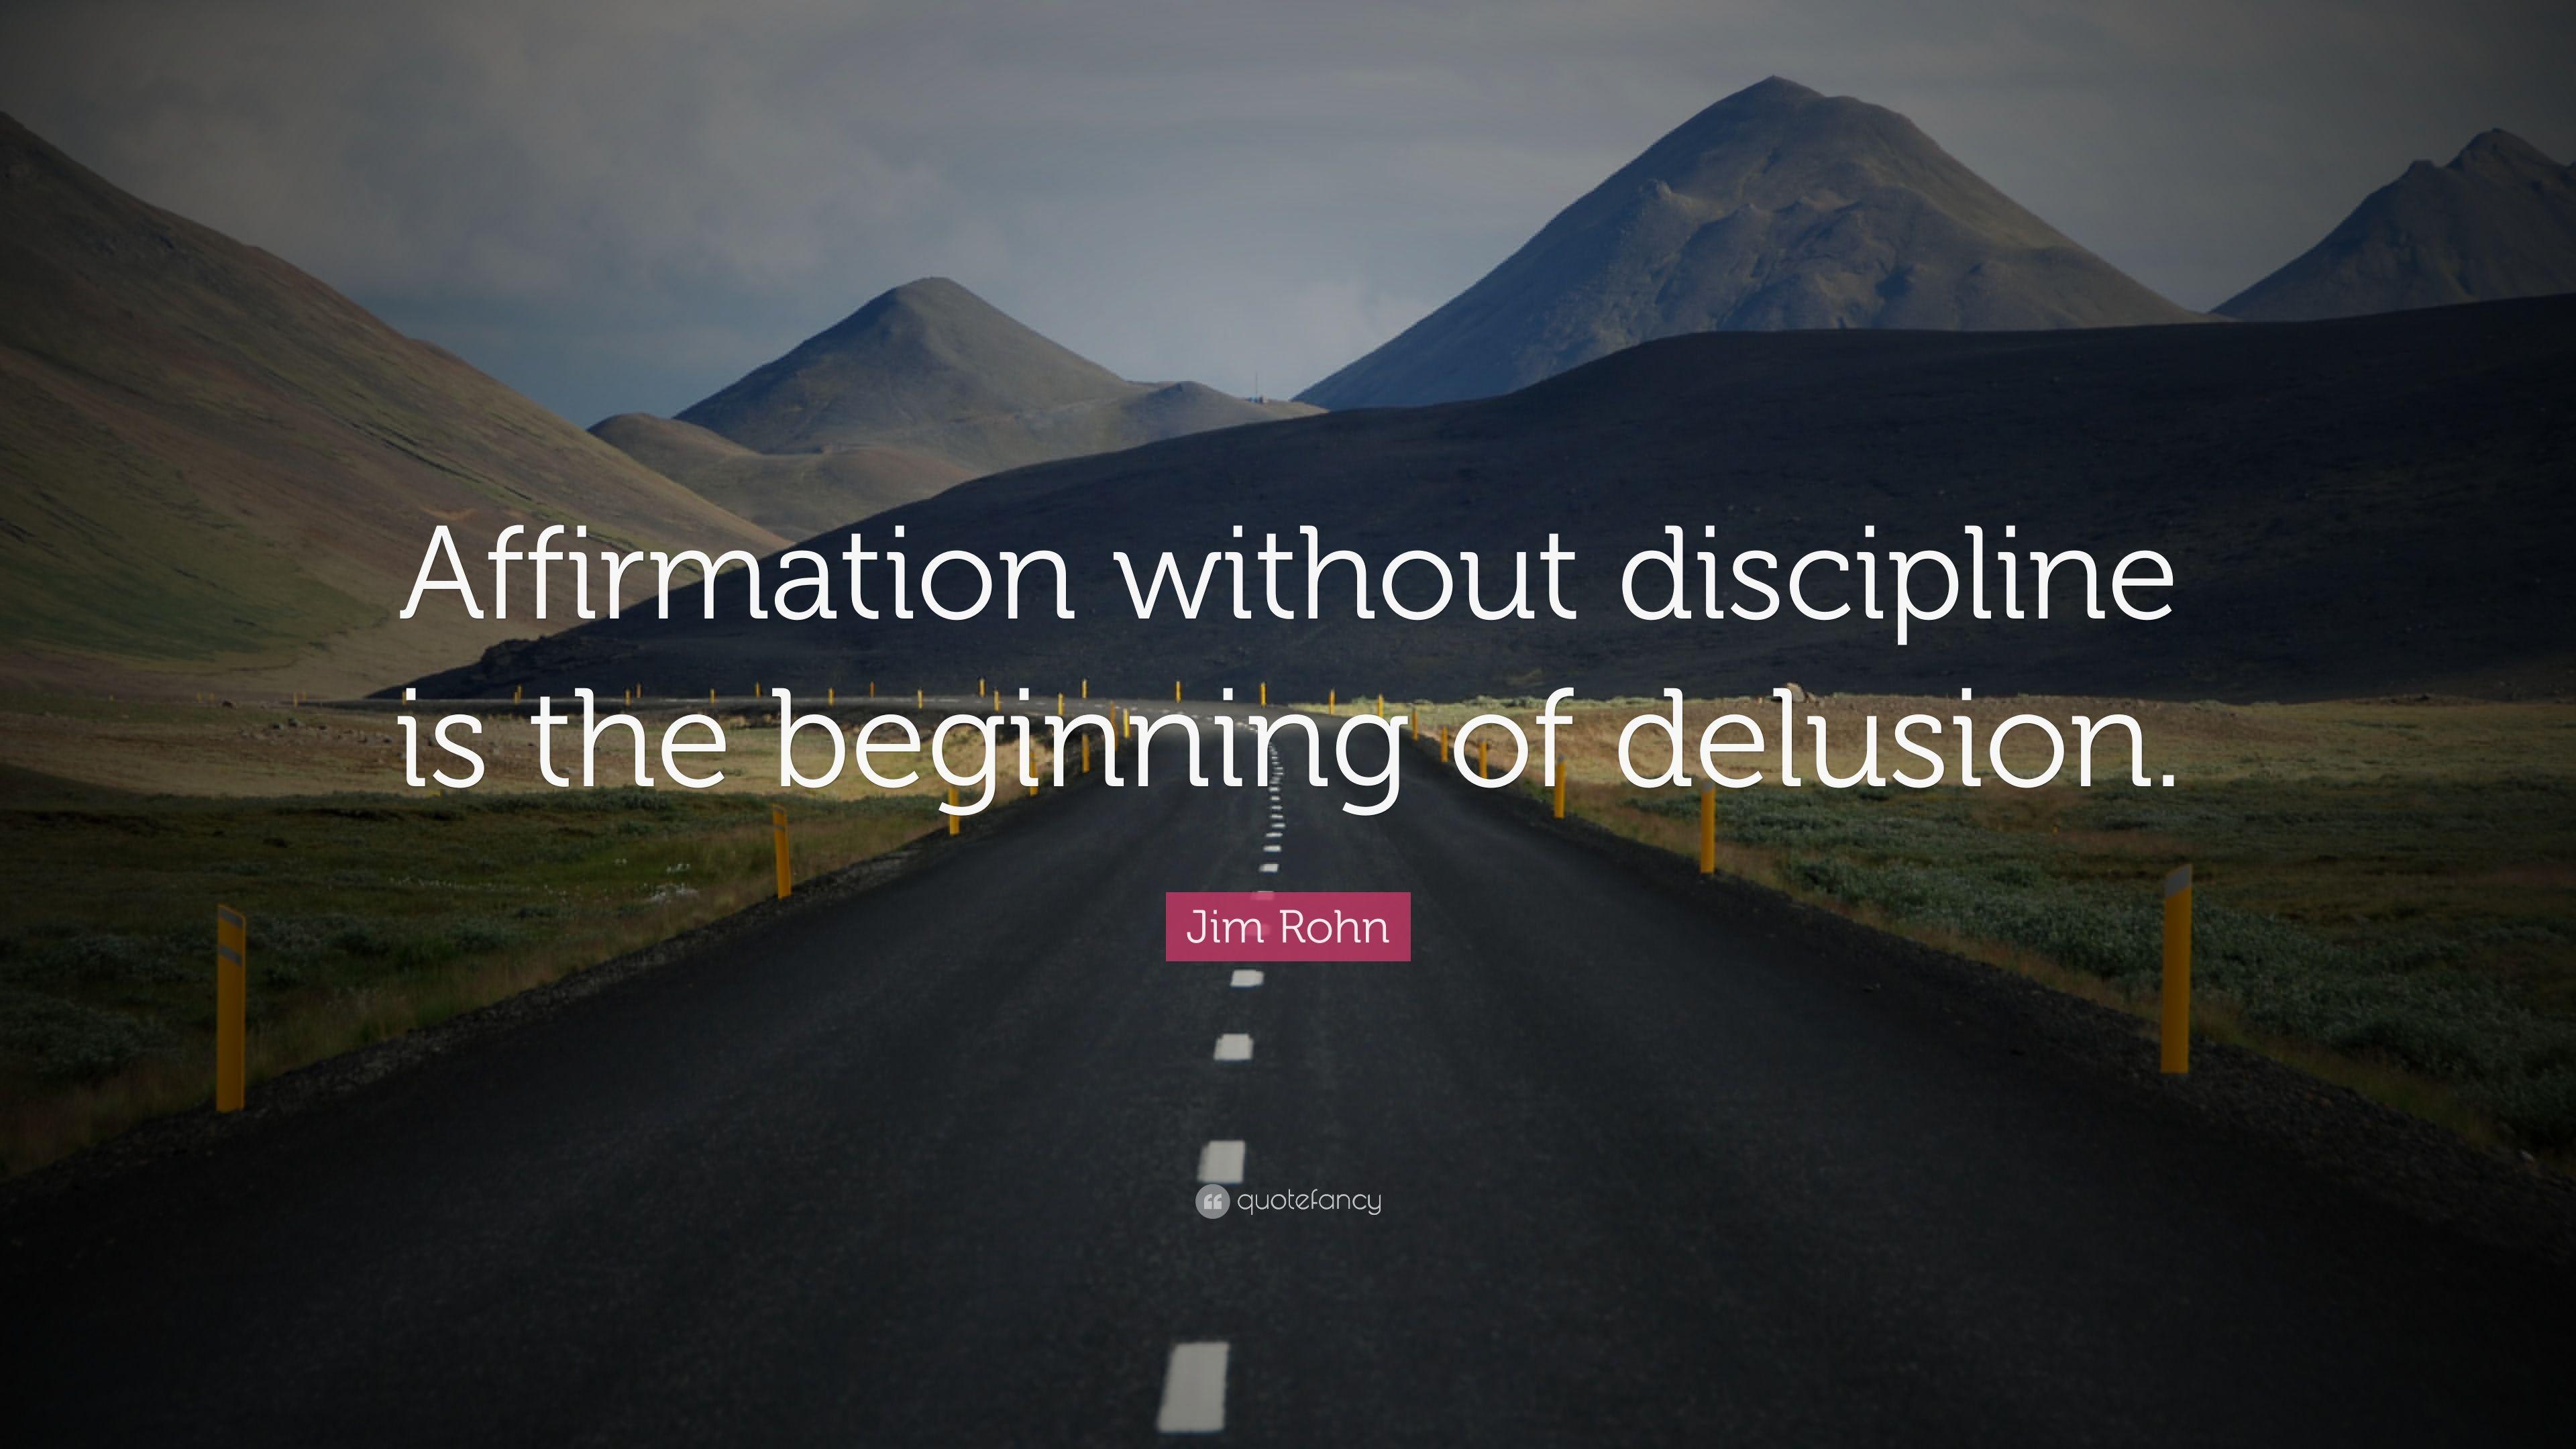 Jim Rohn Quote: “Affirmation without discipline is the beginning